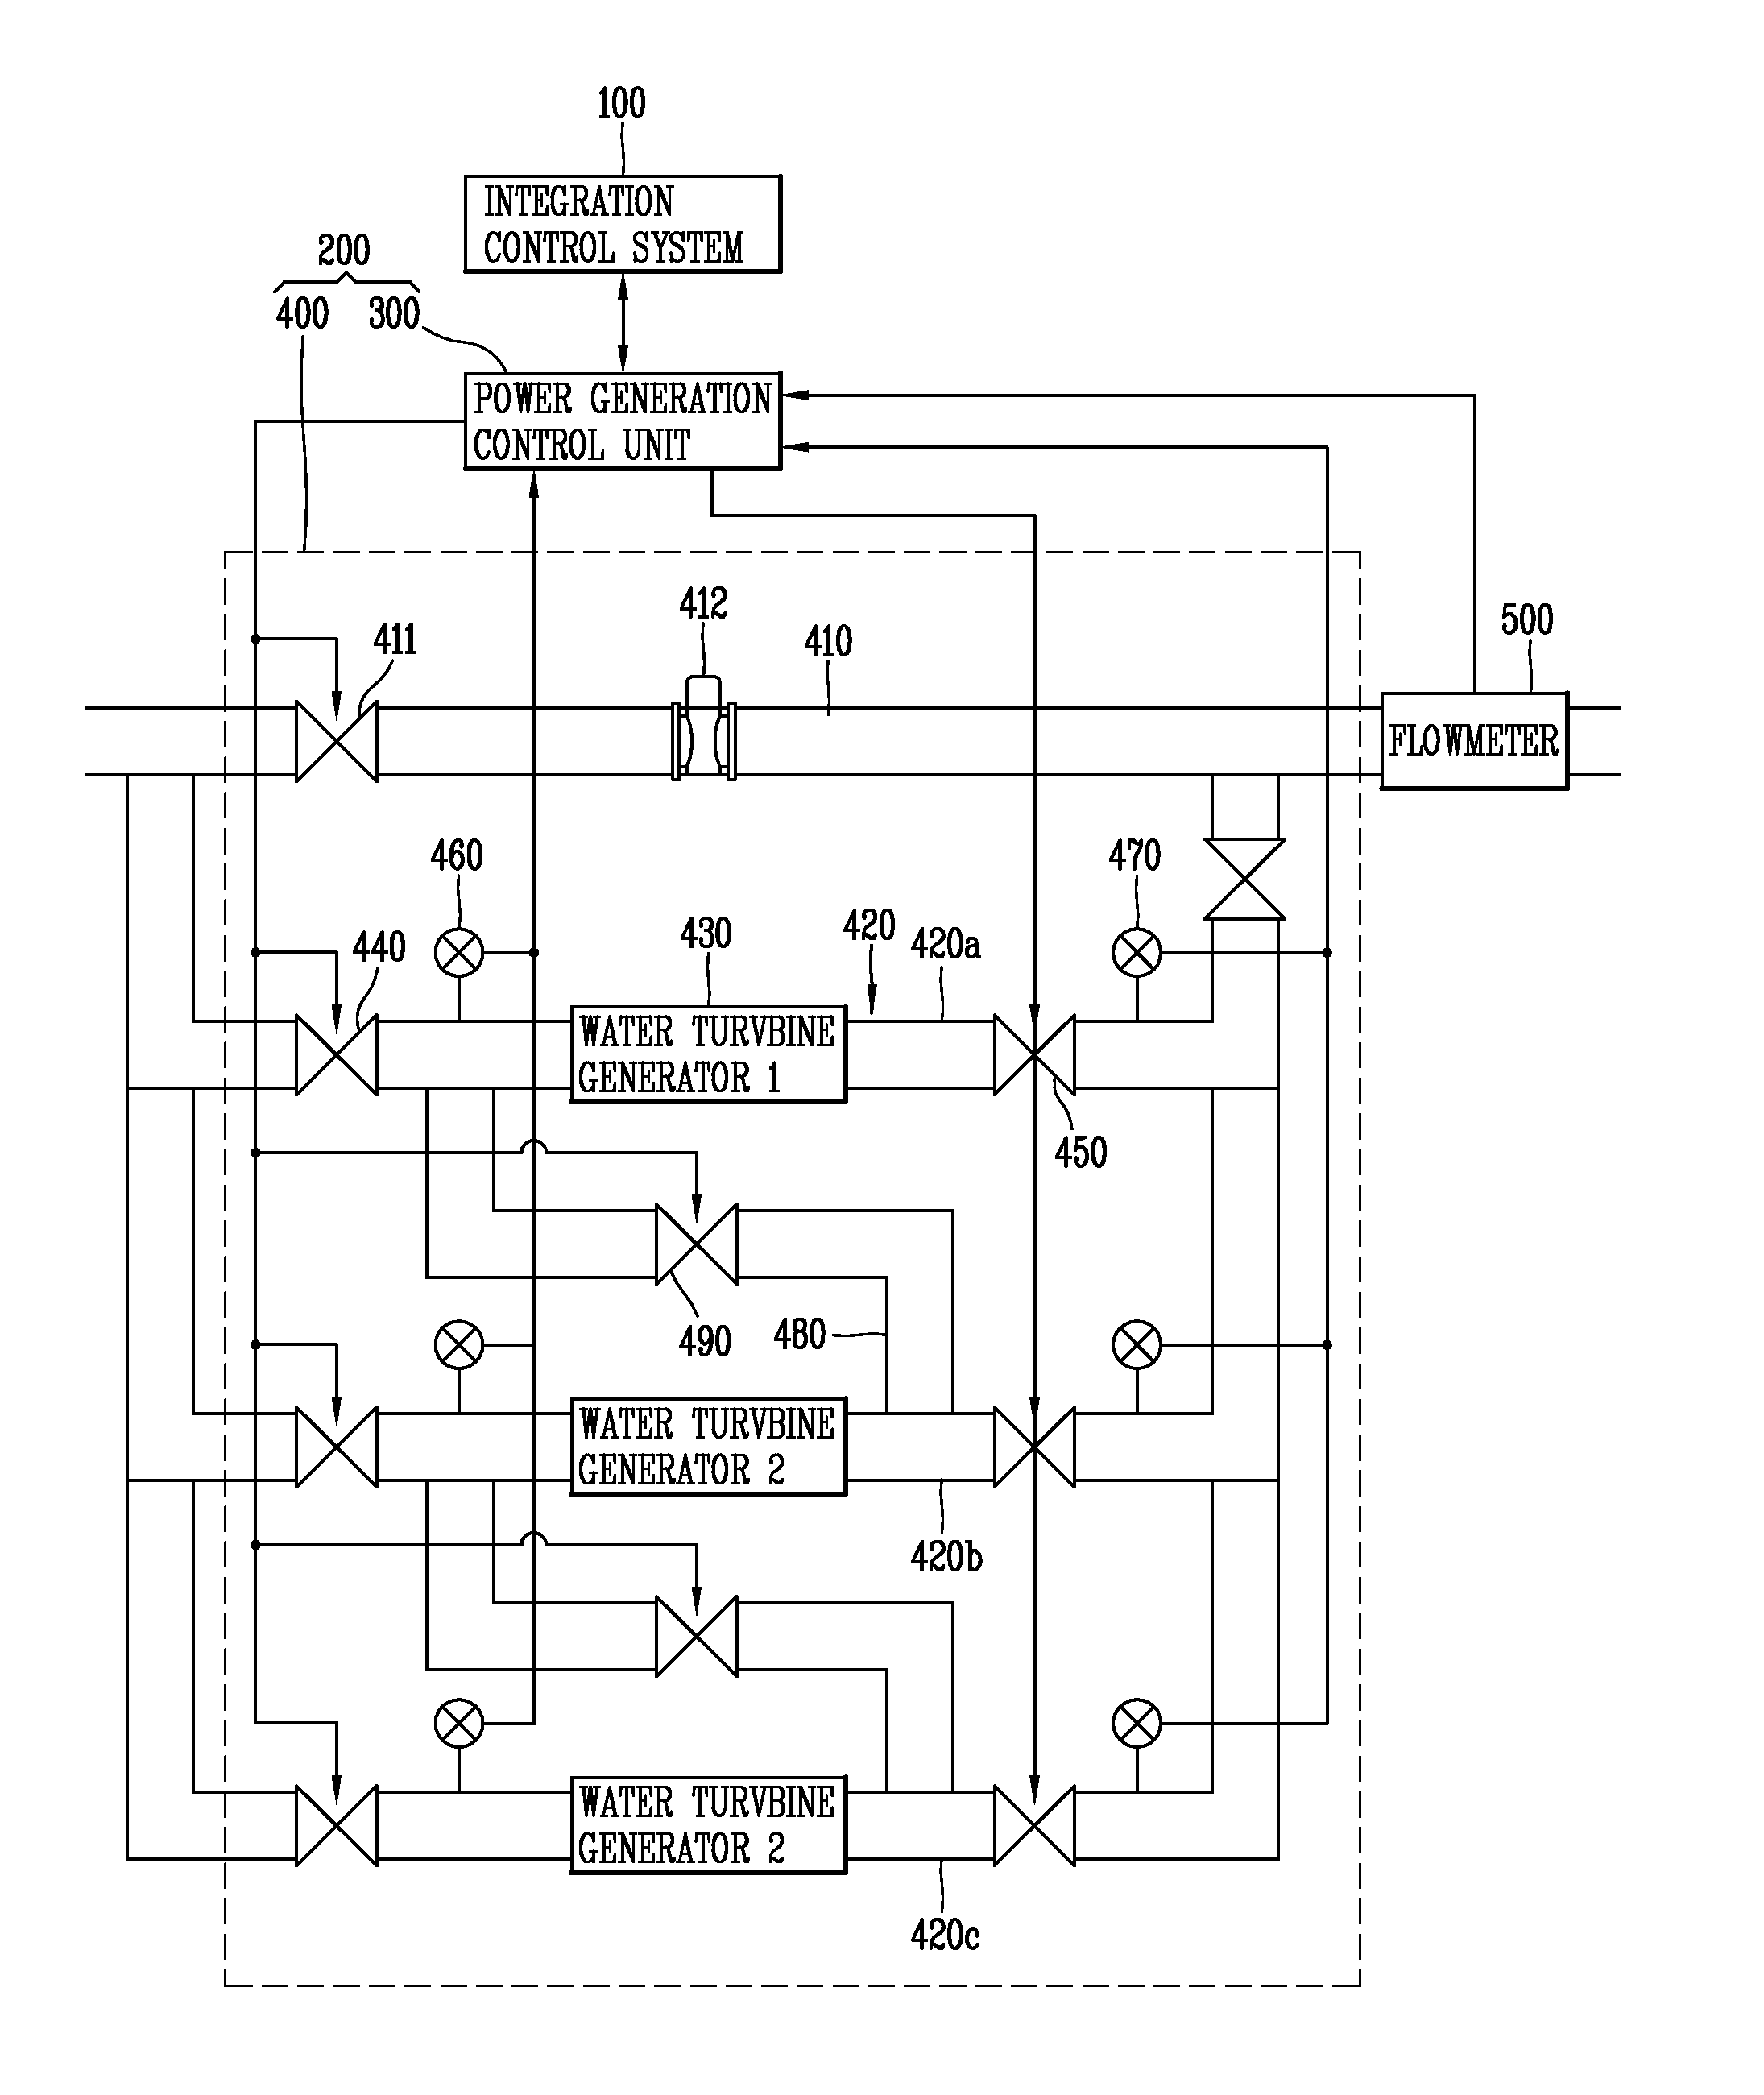 System for controlling water turbine generator for waterworks